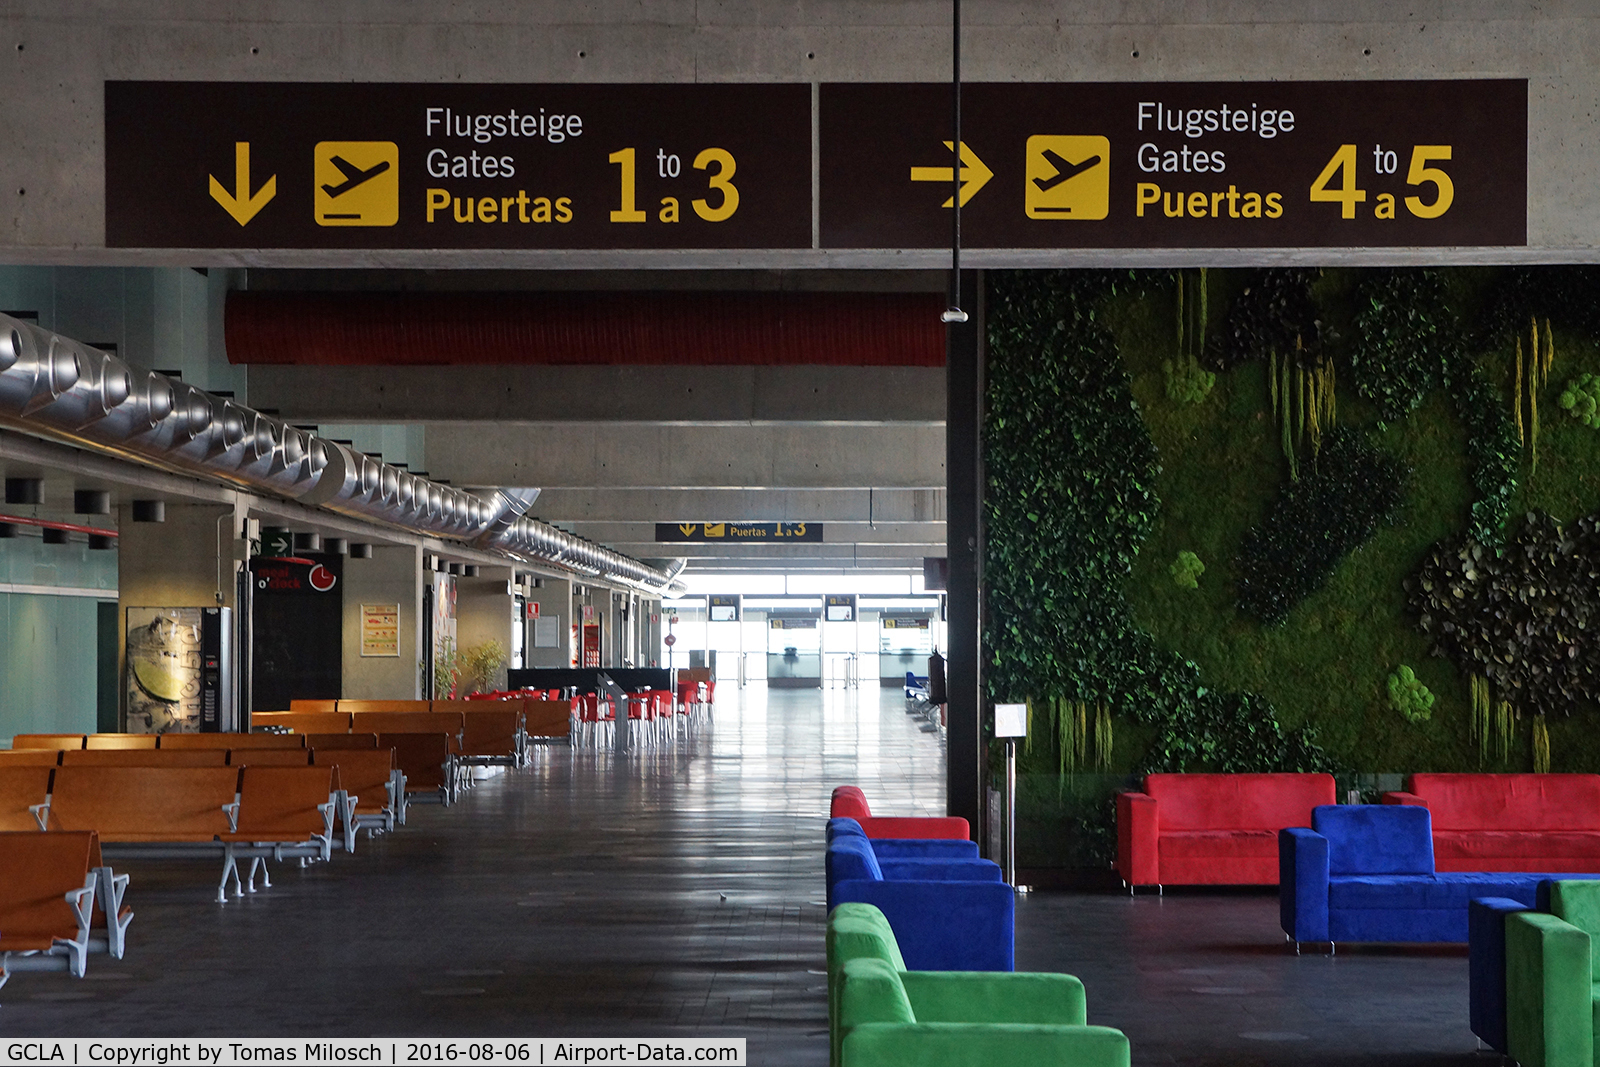 La Palma Airport, La Palma Spain (GCLA) - In times without any charter flight it can be very, very empty ...